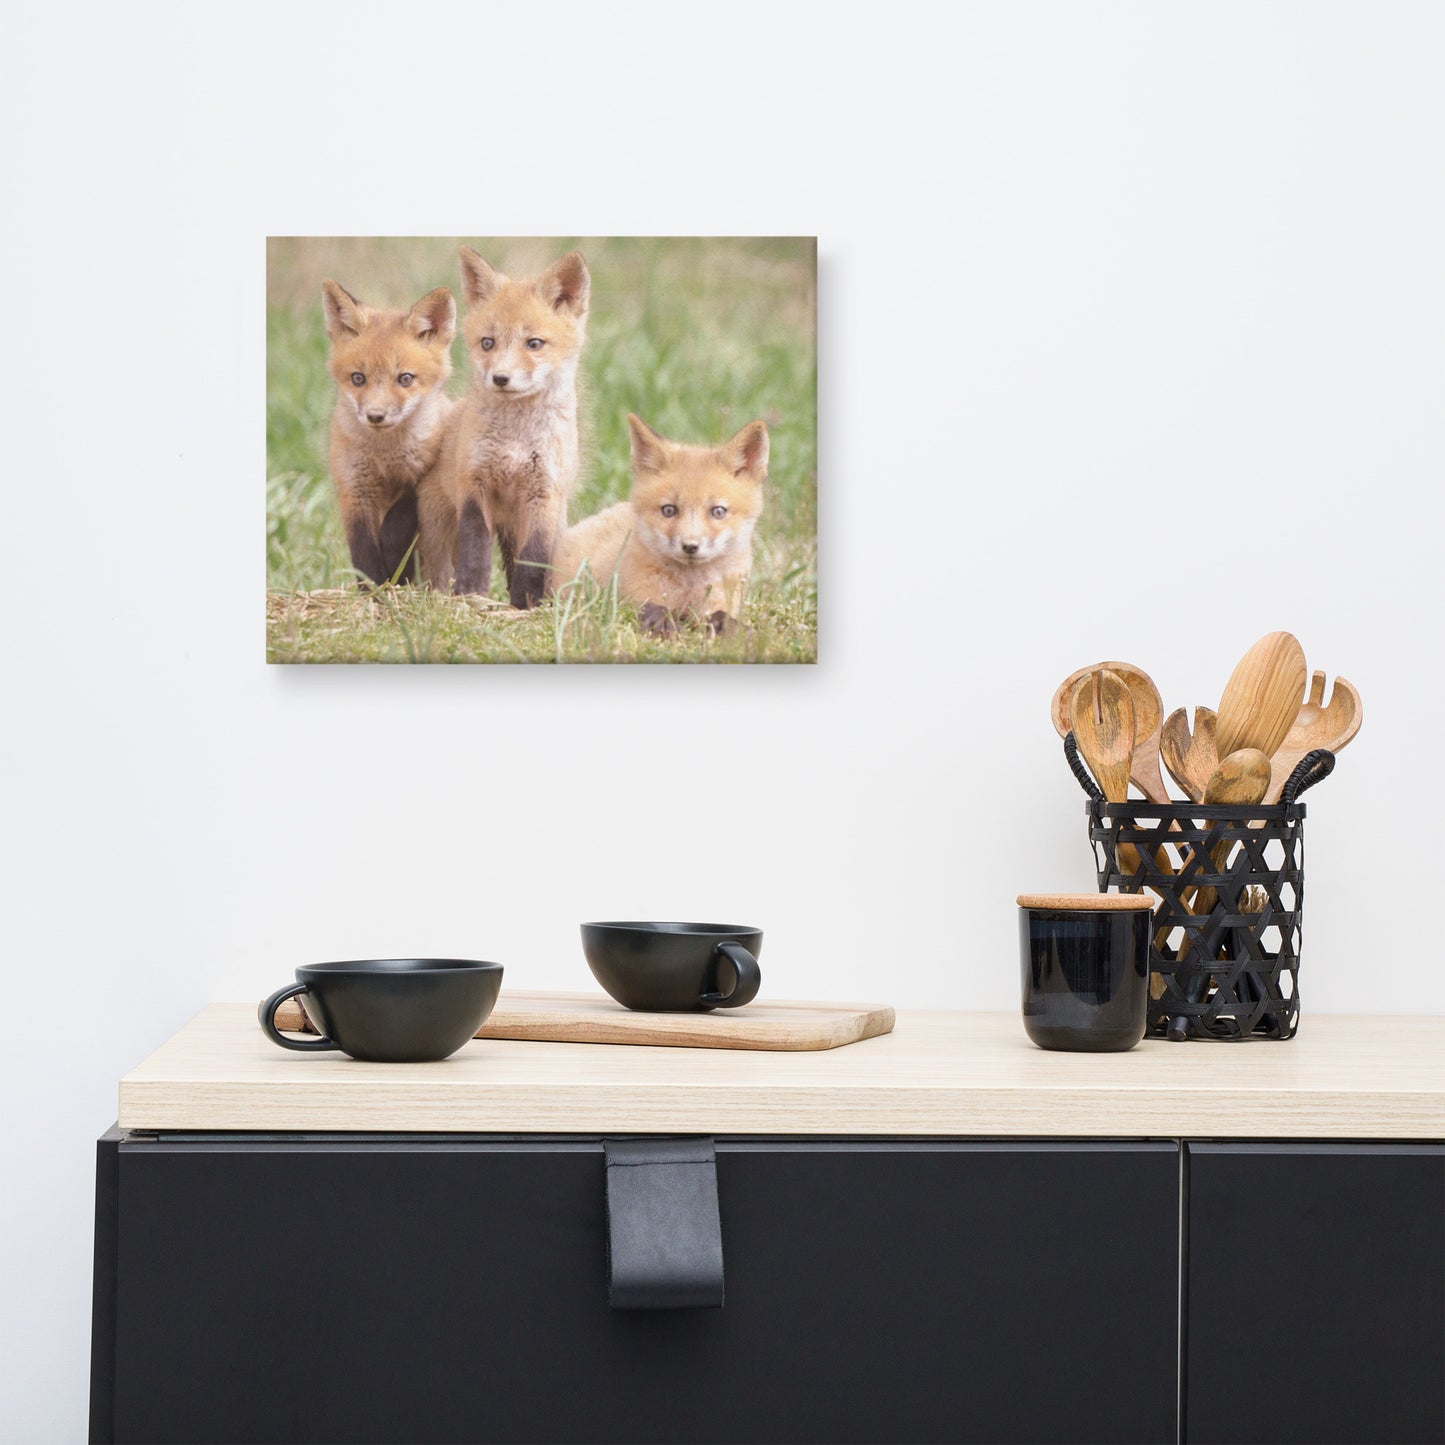 Baby Red Foxes Siblings Animal / Wildlife Photograph Canvas Wall Art Prints